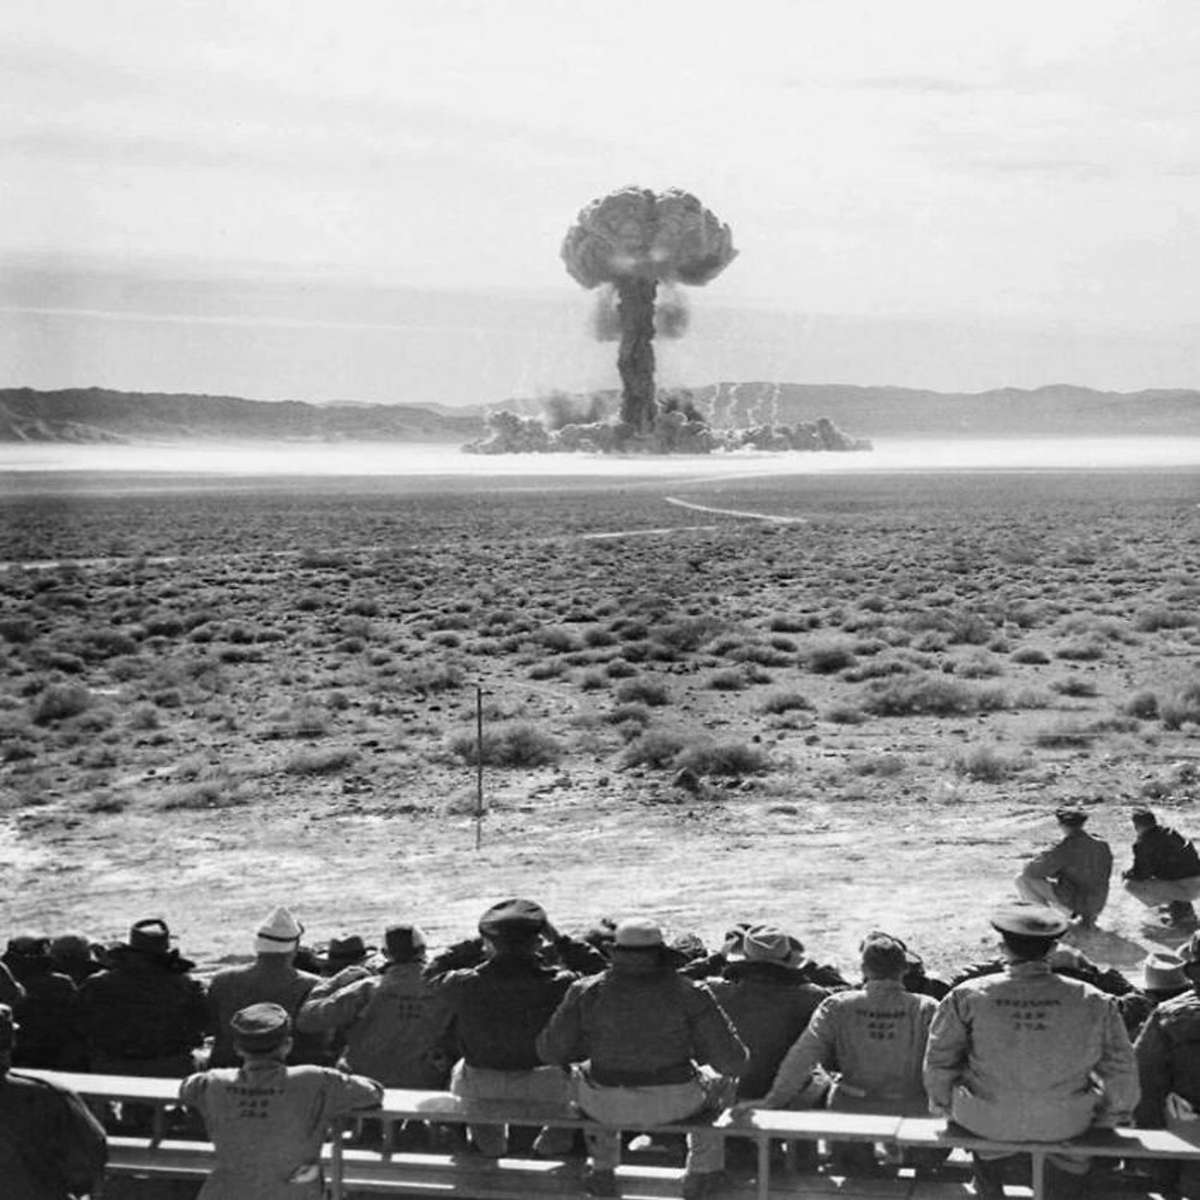 Operation Buster-Jangle. Dog Atomic Bomb Test At The Nevada Test Site, Had Troops Participating In The Exercise Desert Rock I. It Had A Yield Of 21 Kilotons Of Tnt, And Was The First U.S. Nuclear Field Exercise Conducted With Live Troops Maneuvering On The Ground. Troops Were Six Miles From The Blast 1 November, 1951